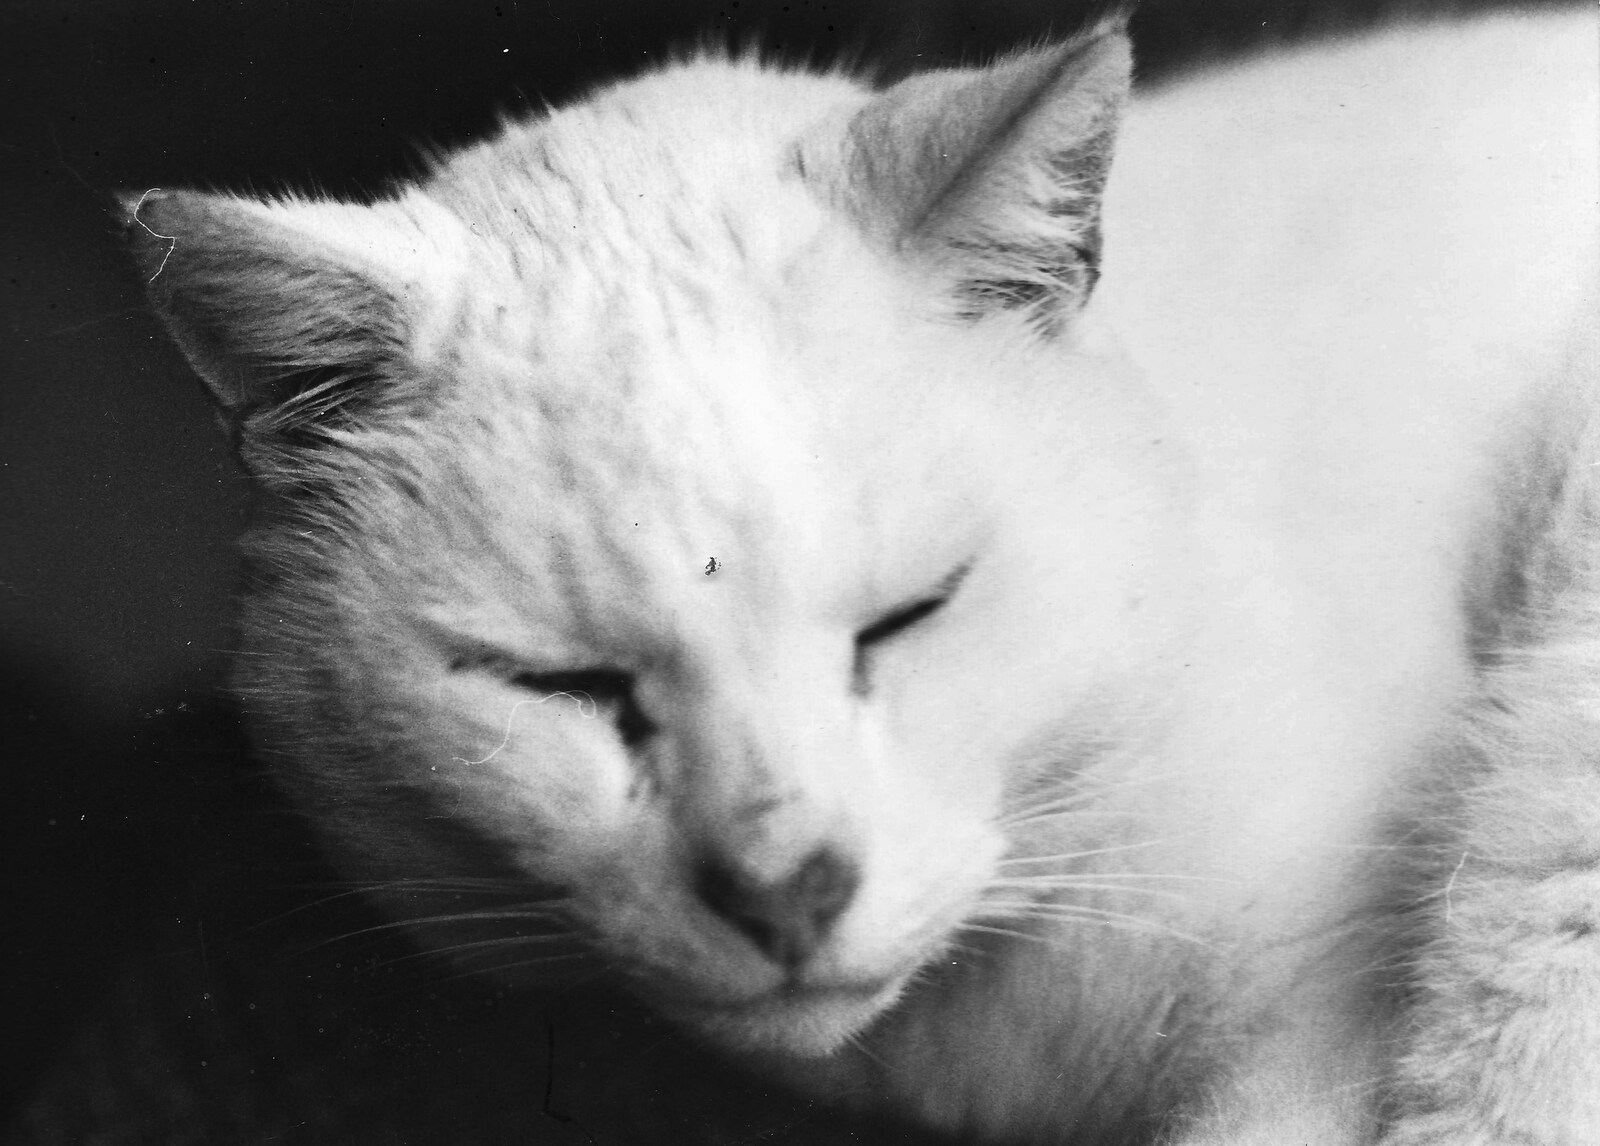 Hamish's cat from The New Forest Marathon and Other Randomness, New Milton, Hampshire - 15th September 1985